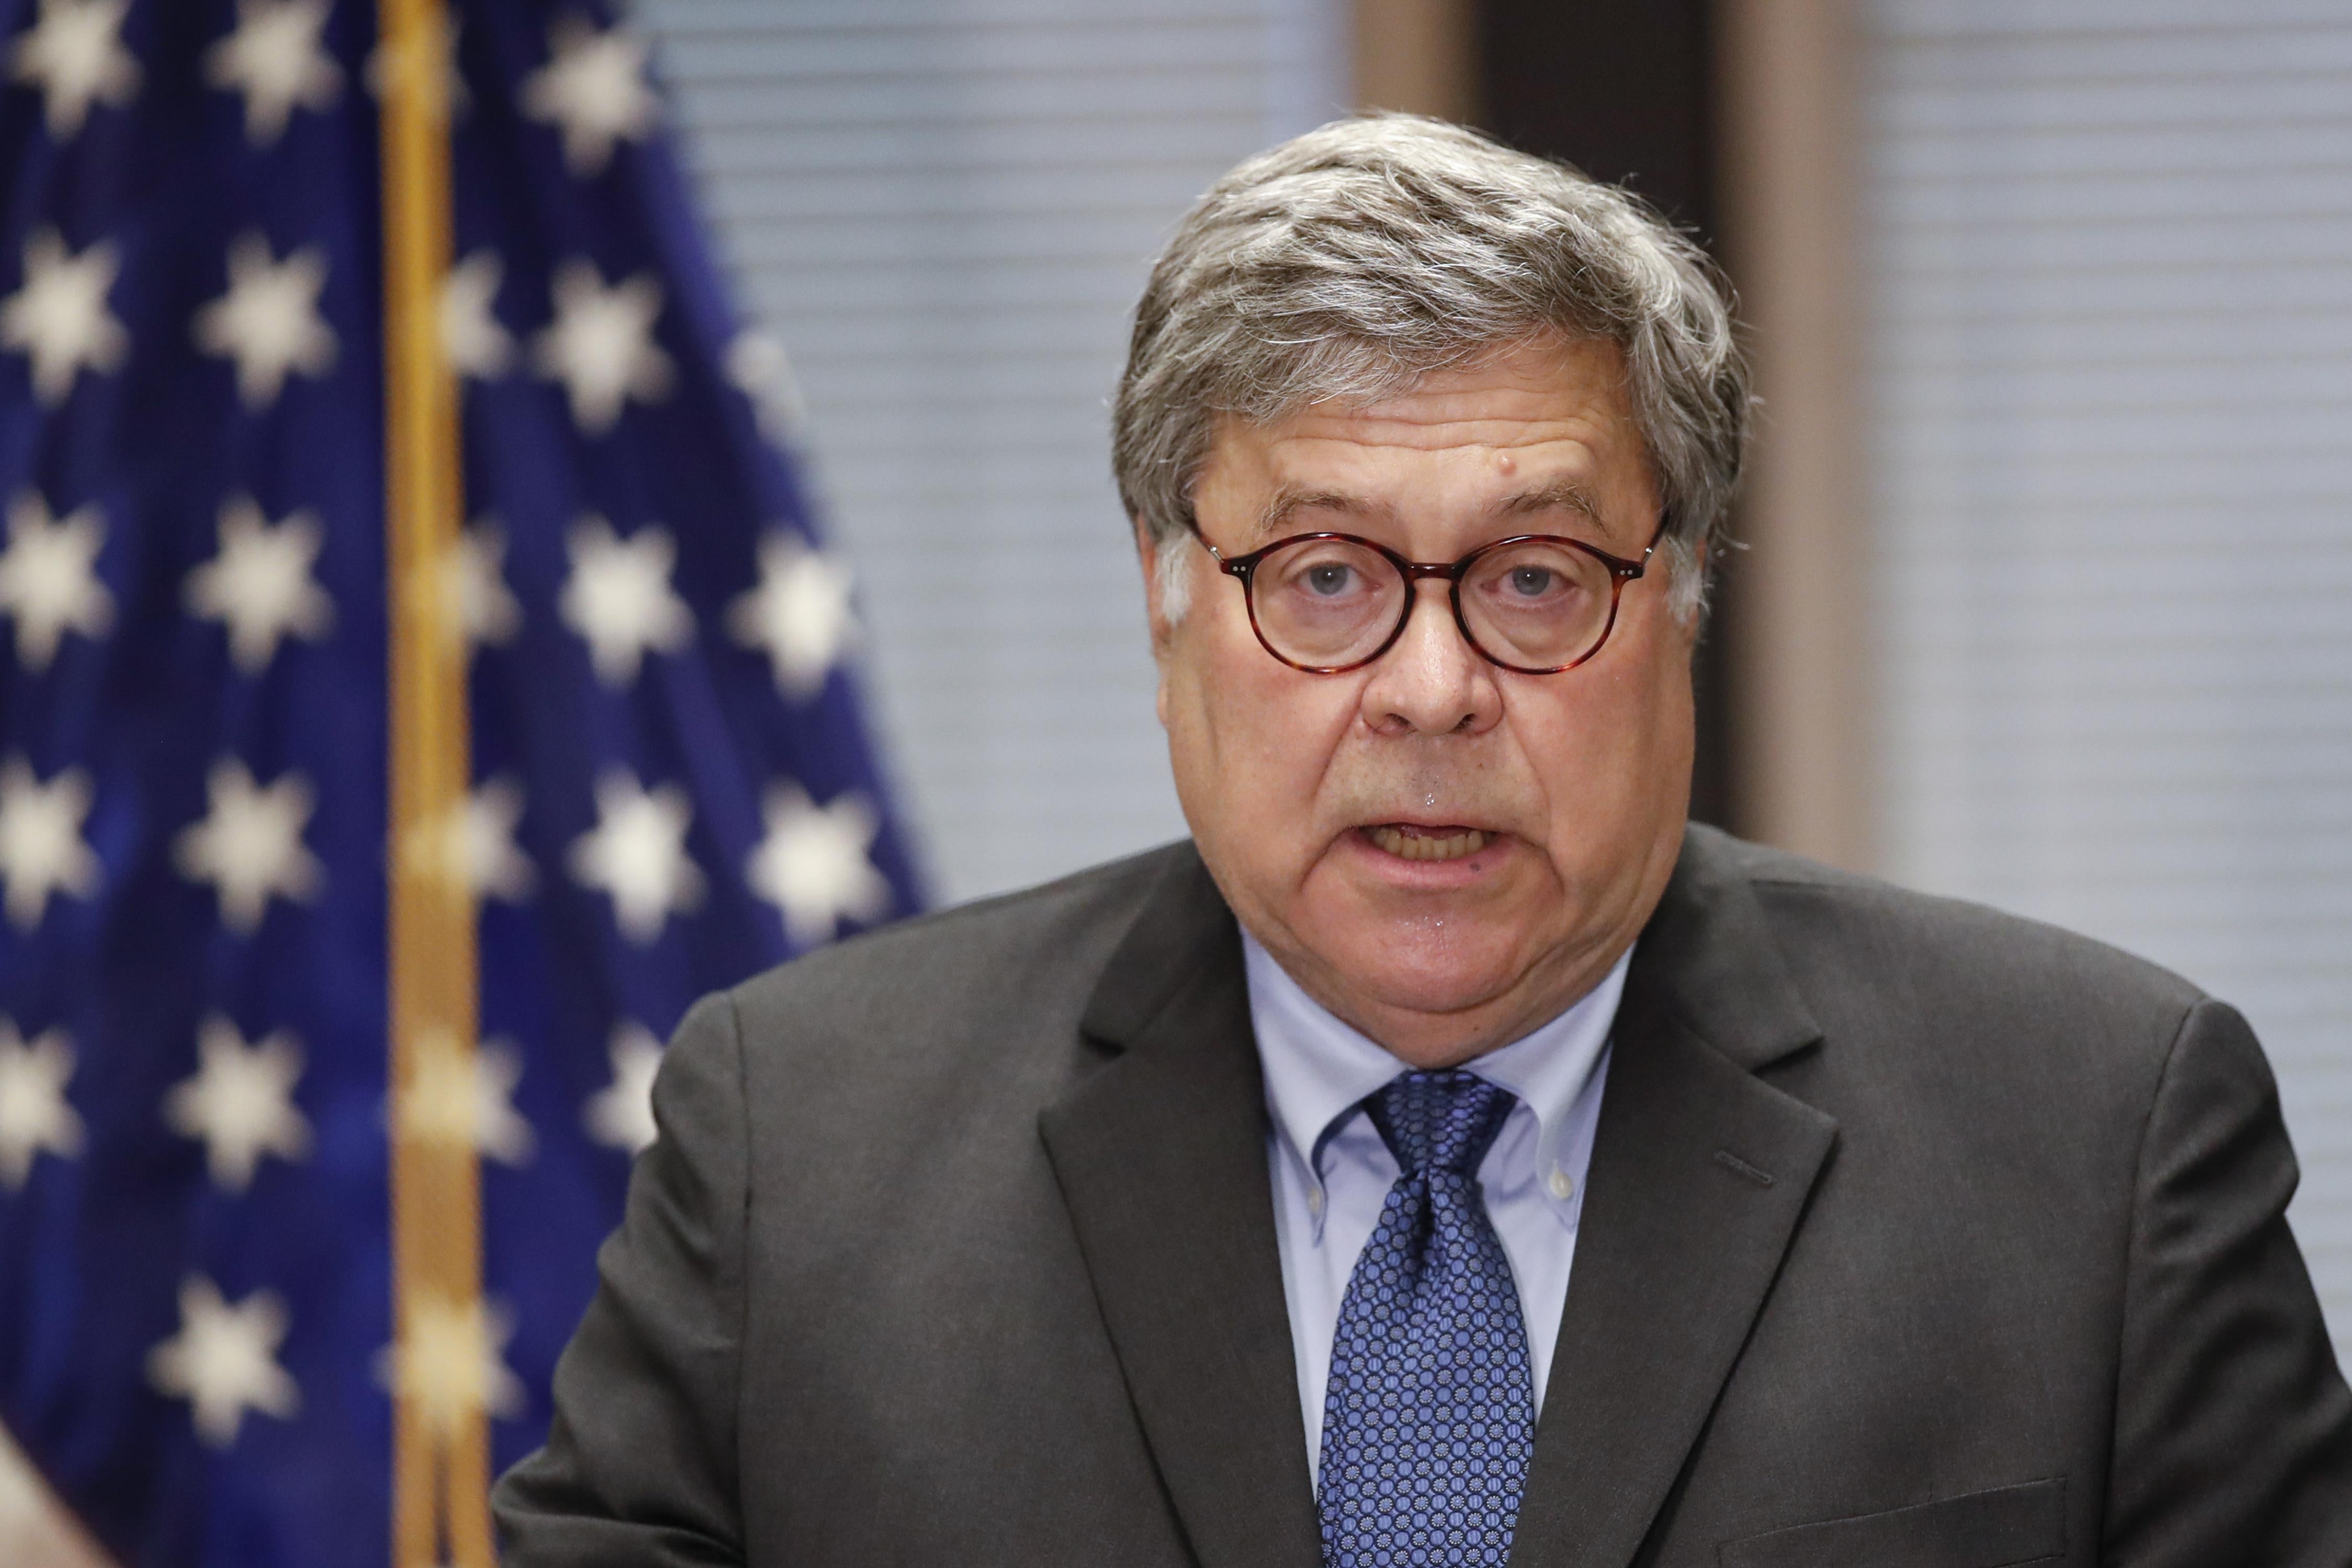 William Barr speaks in front of an American flag.